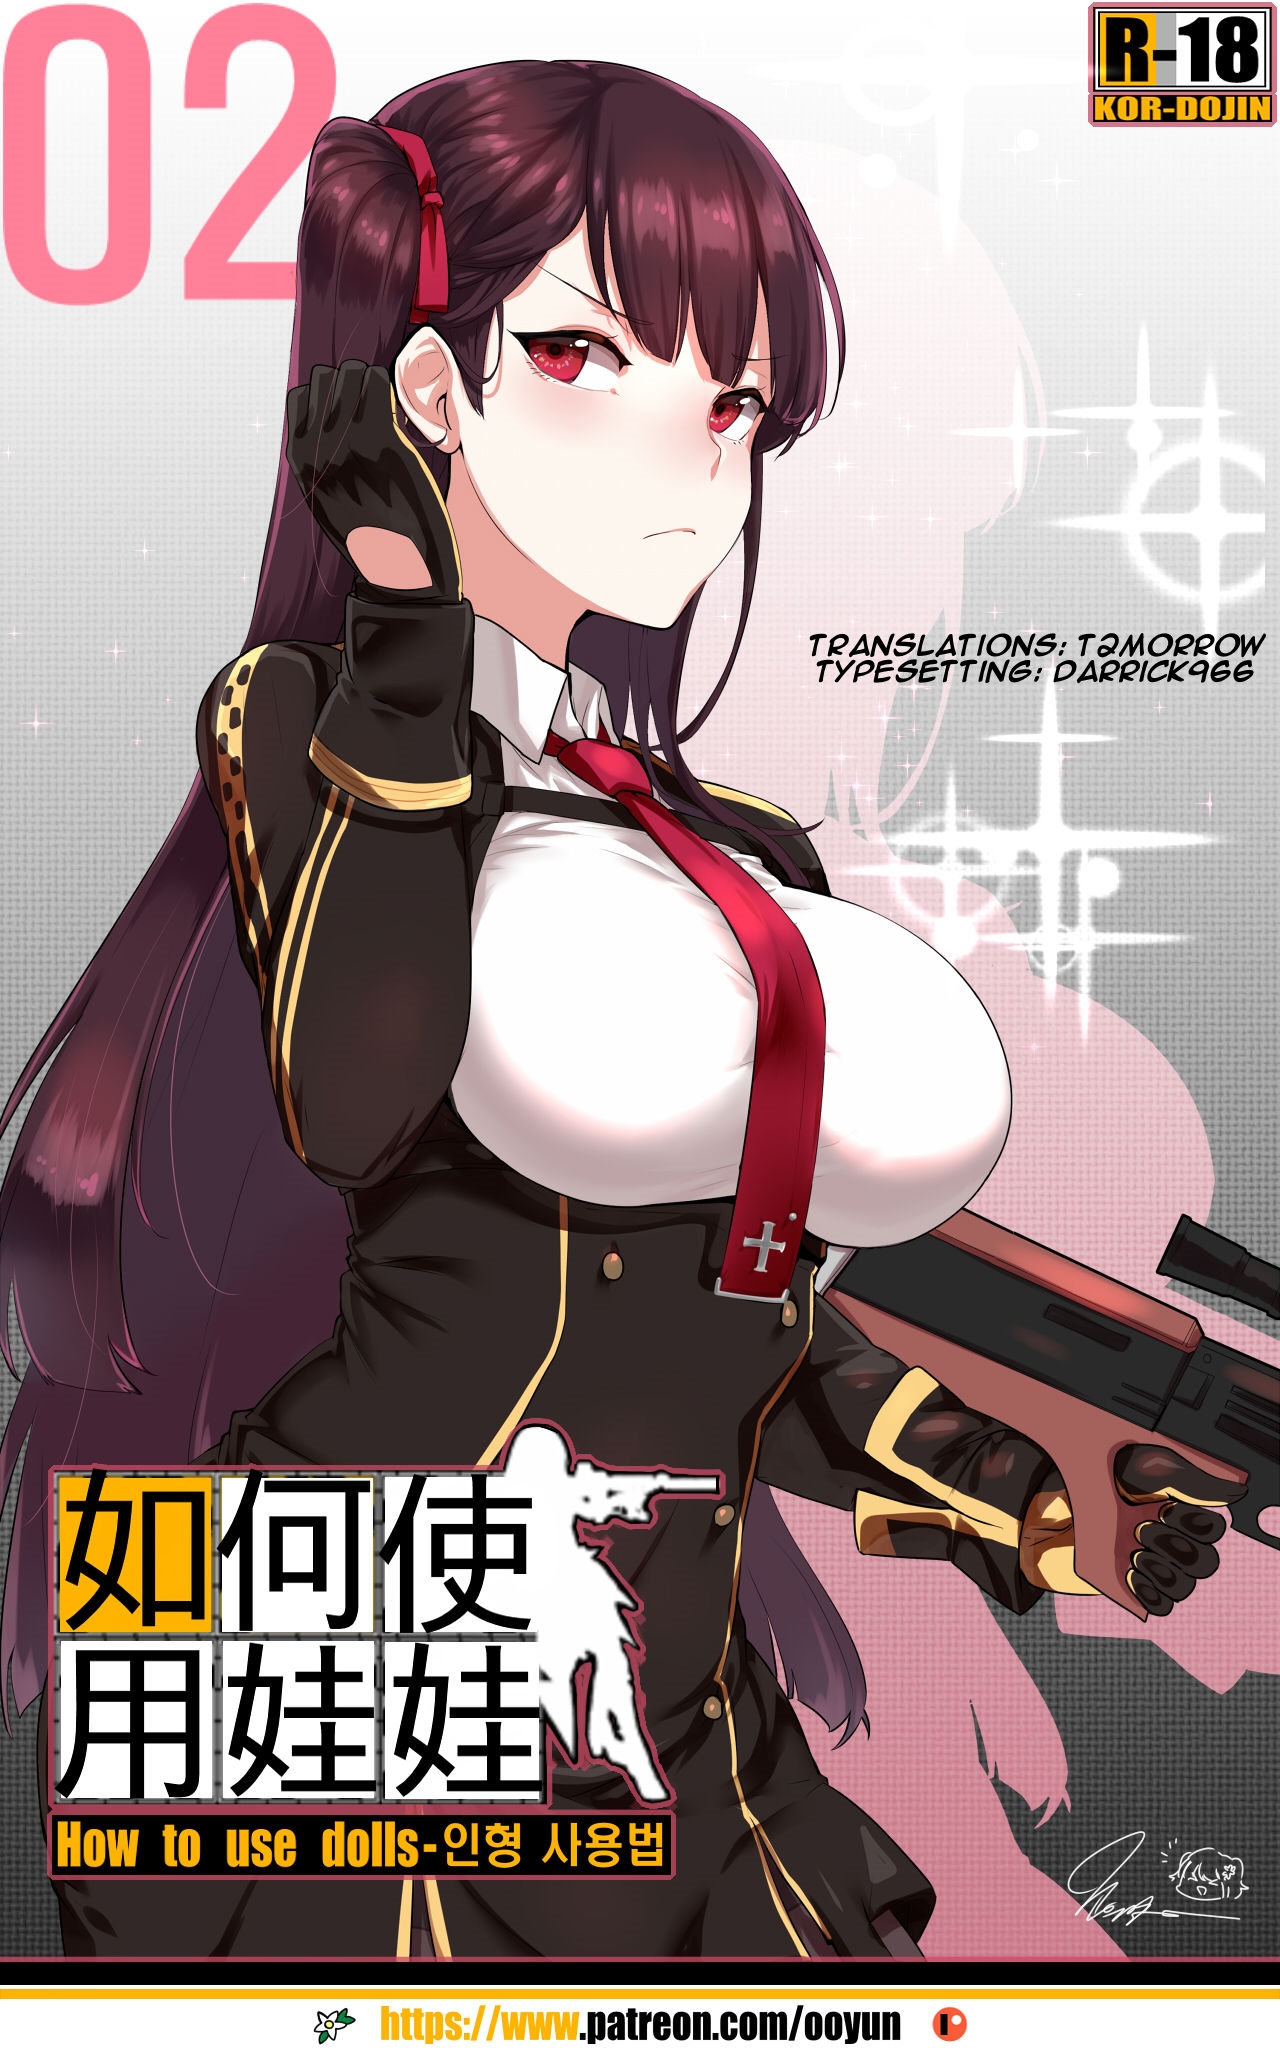 [yun-uyeon (ooyun)] How to use dolls 02 (Girls Frontline) [English] page 1 full